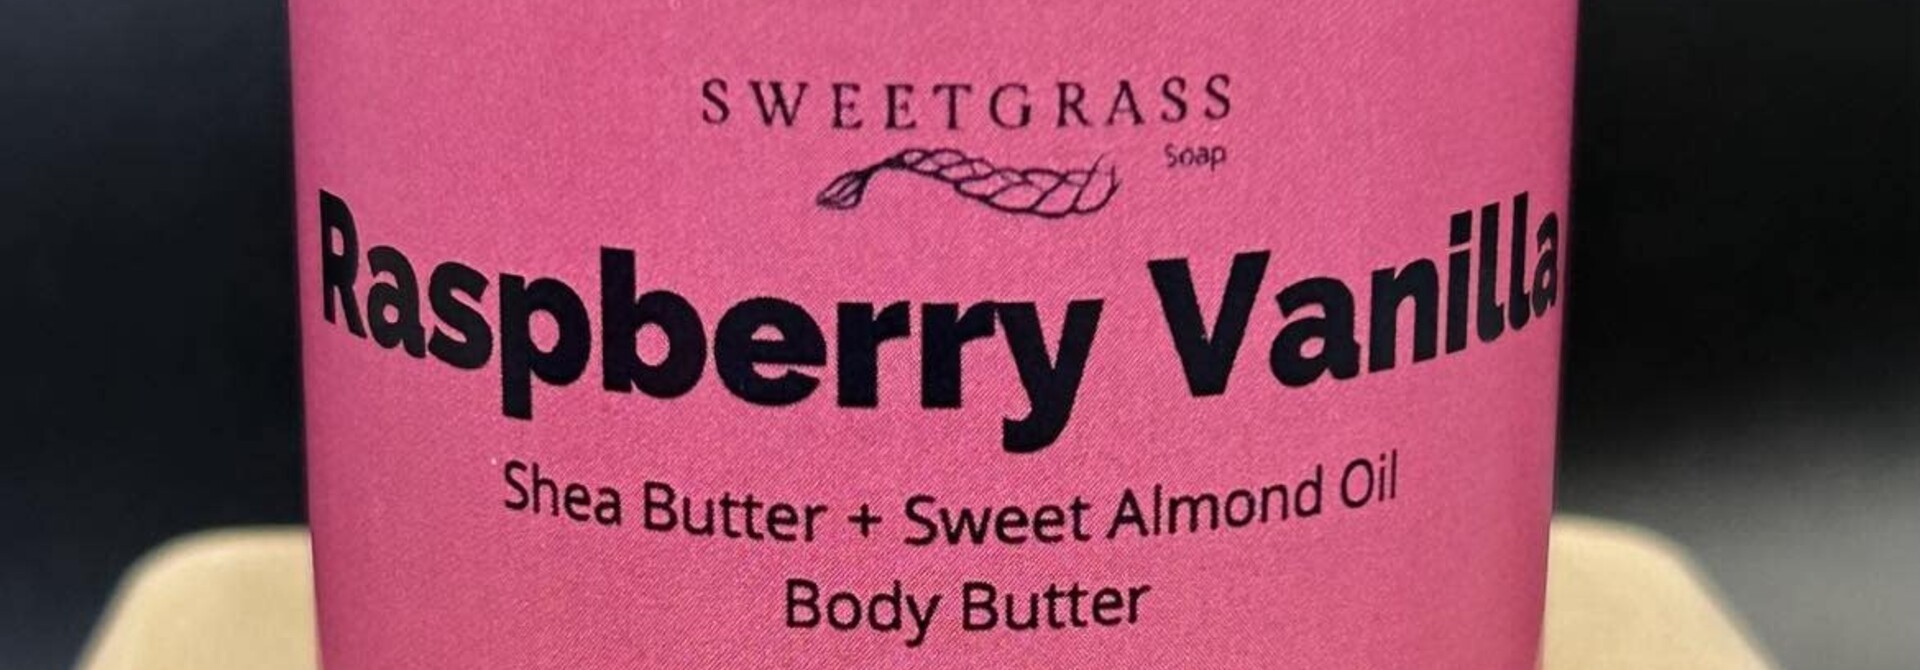 Raspberry Vanilla  Body Butter by Sweetgrass Soaps